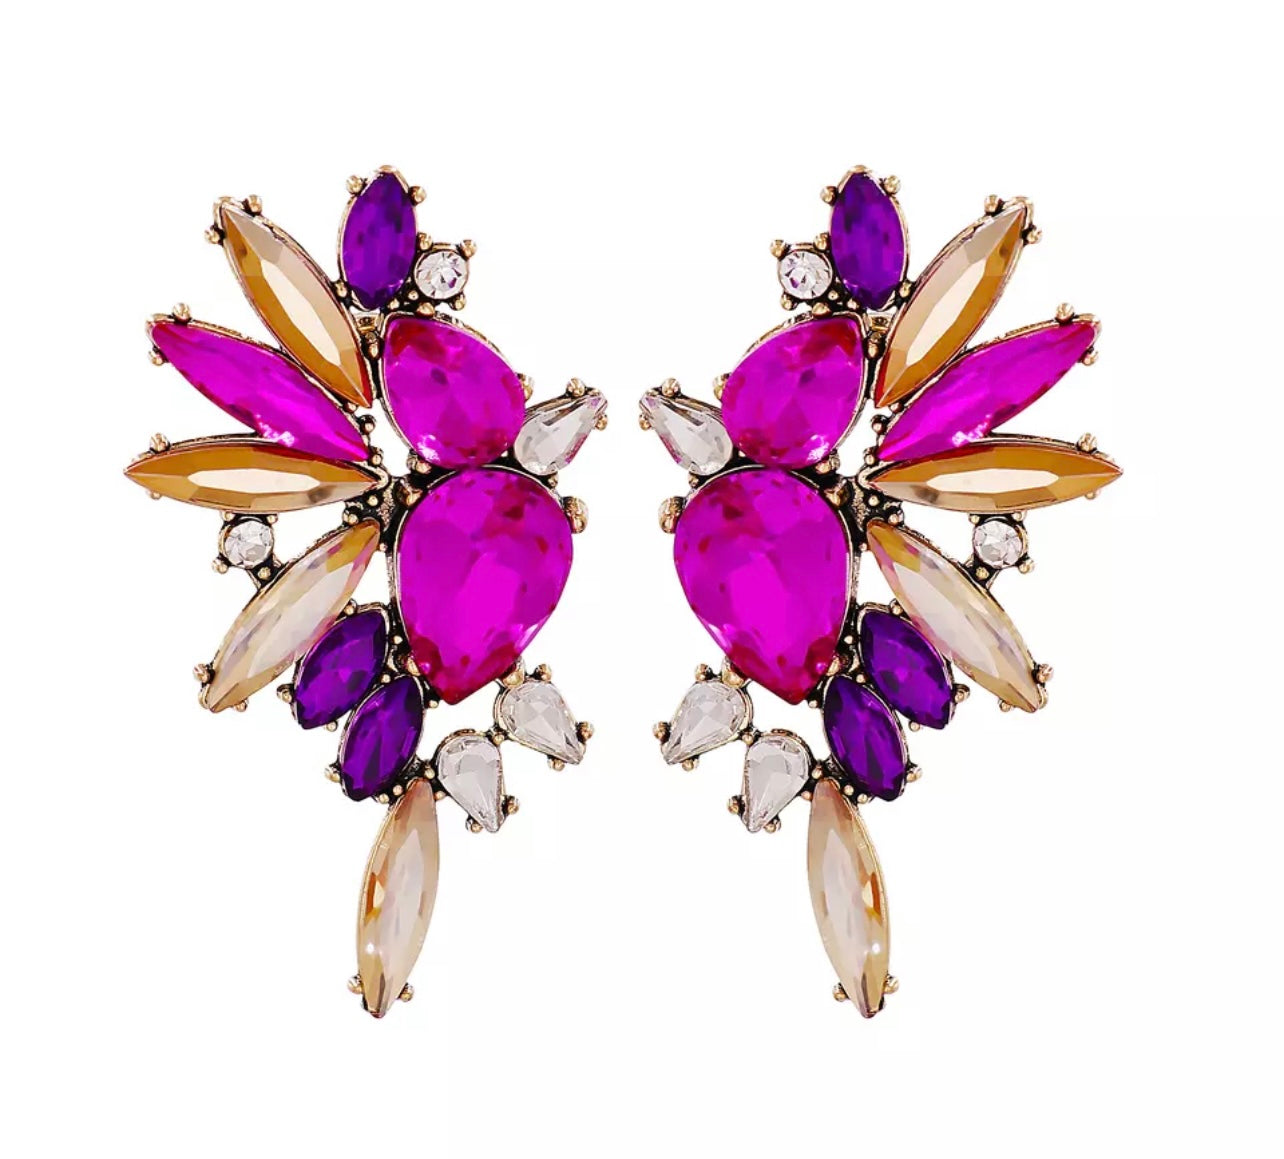 Statement Crystal Earring